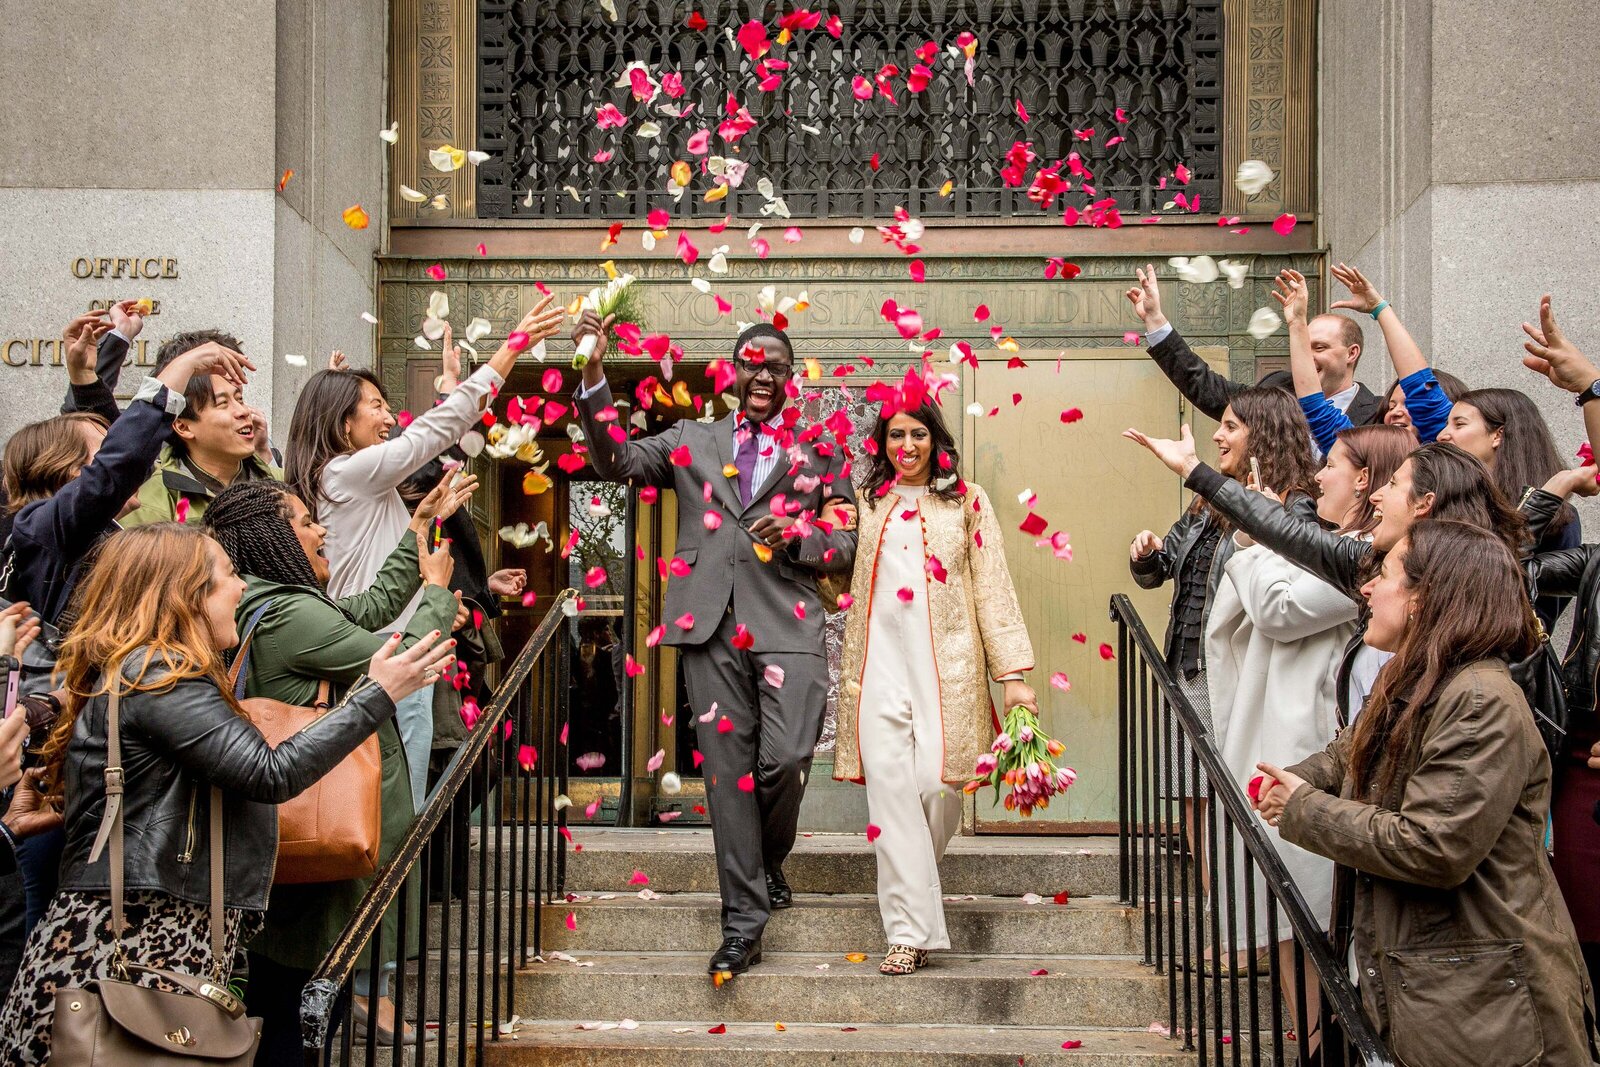 Wedding guests throwing rose petals as a wedding couple walks down a staircase.